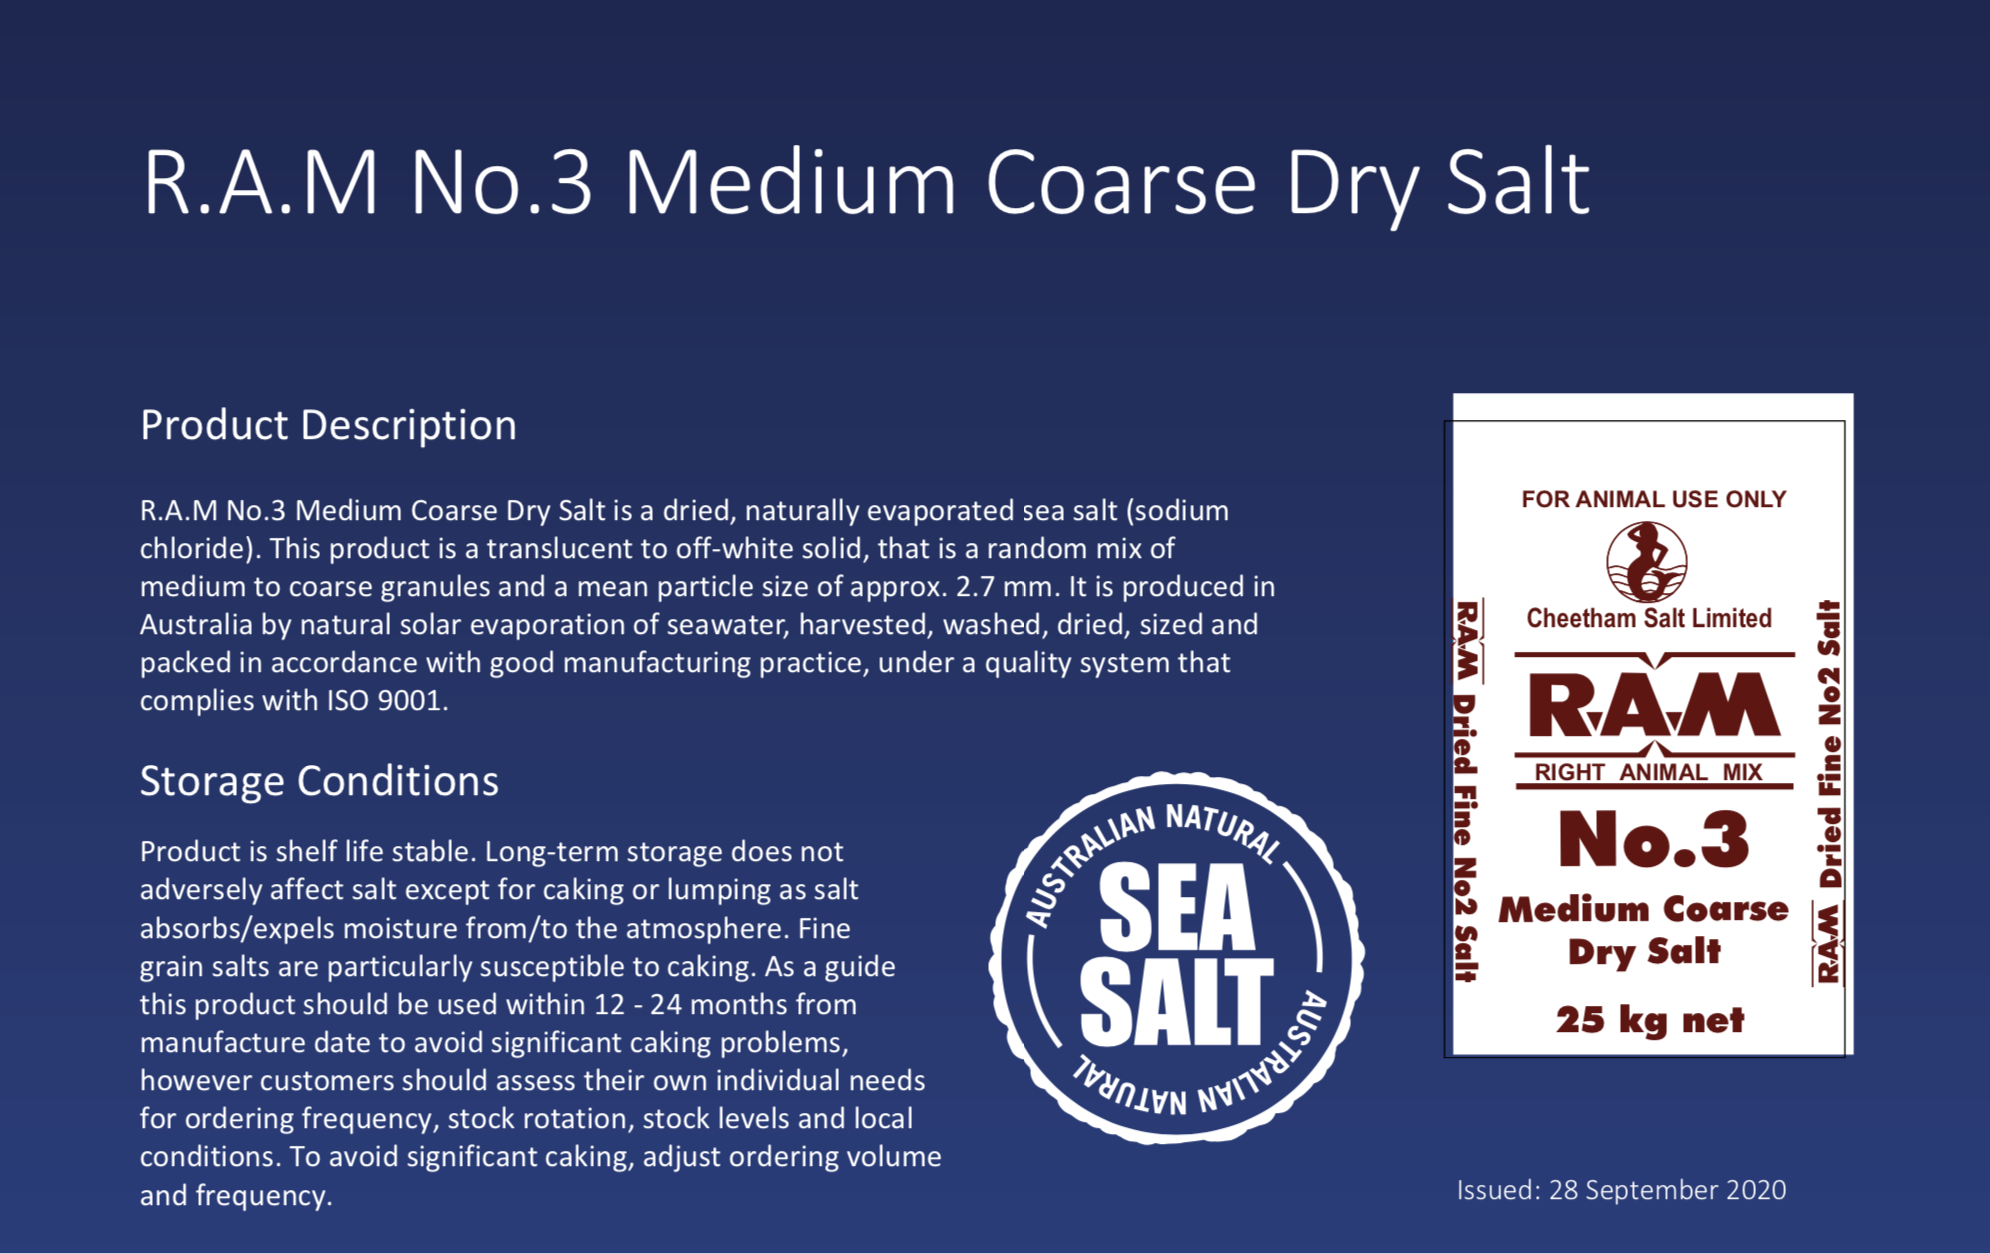 R.A.M. No. 3 Medium Coarse Dry Salt product description. The product description includes storage conditions and a seal stating 